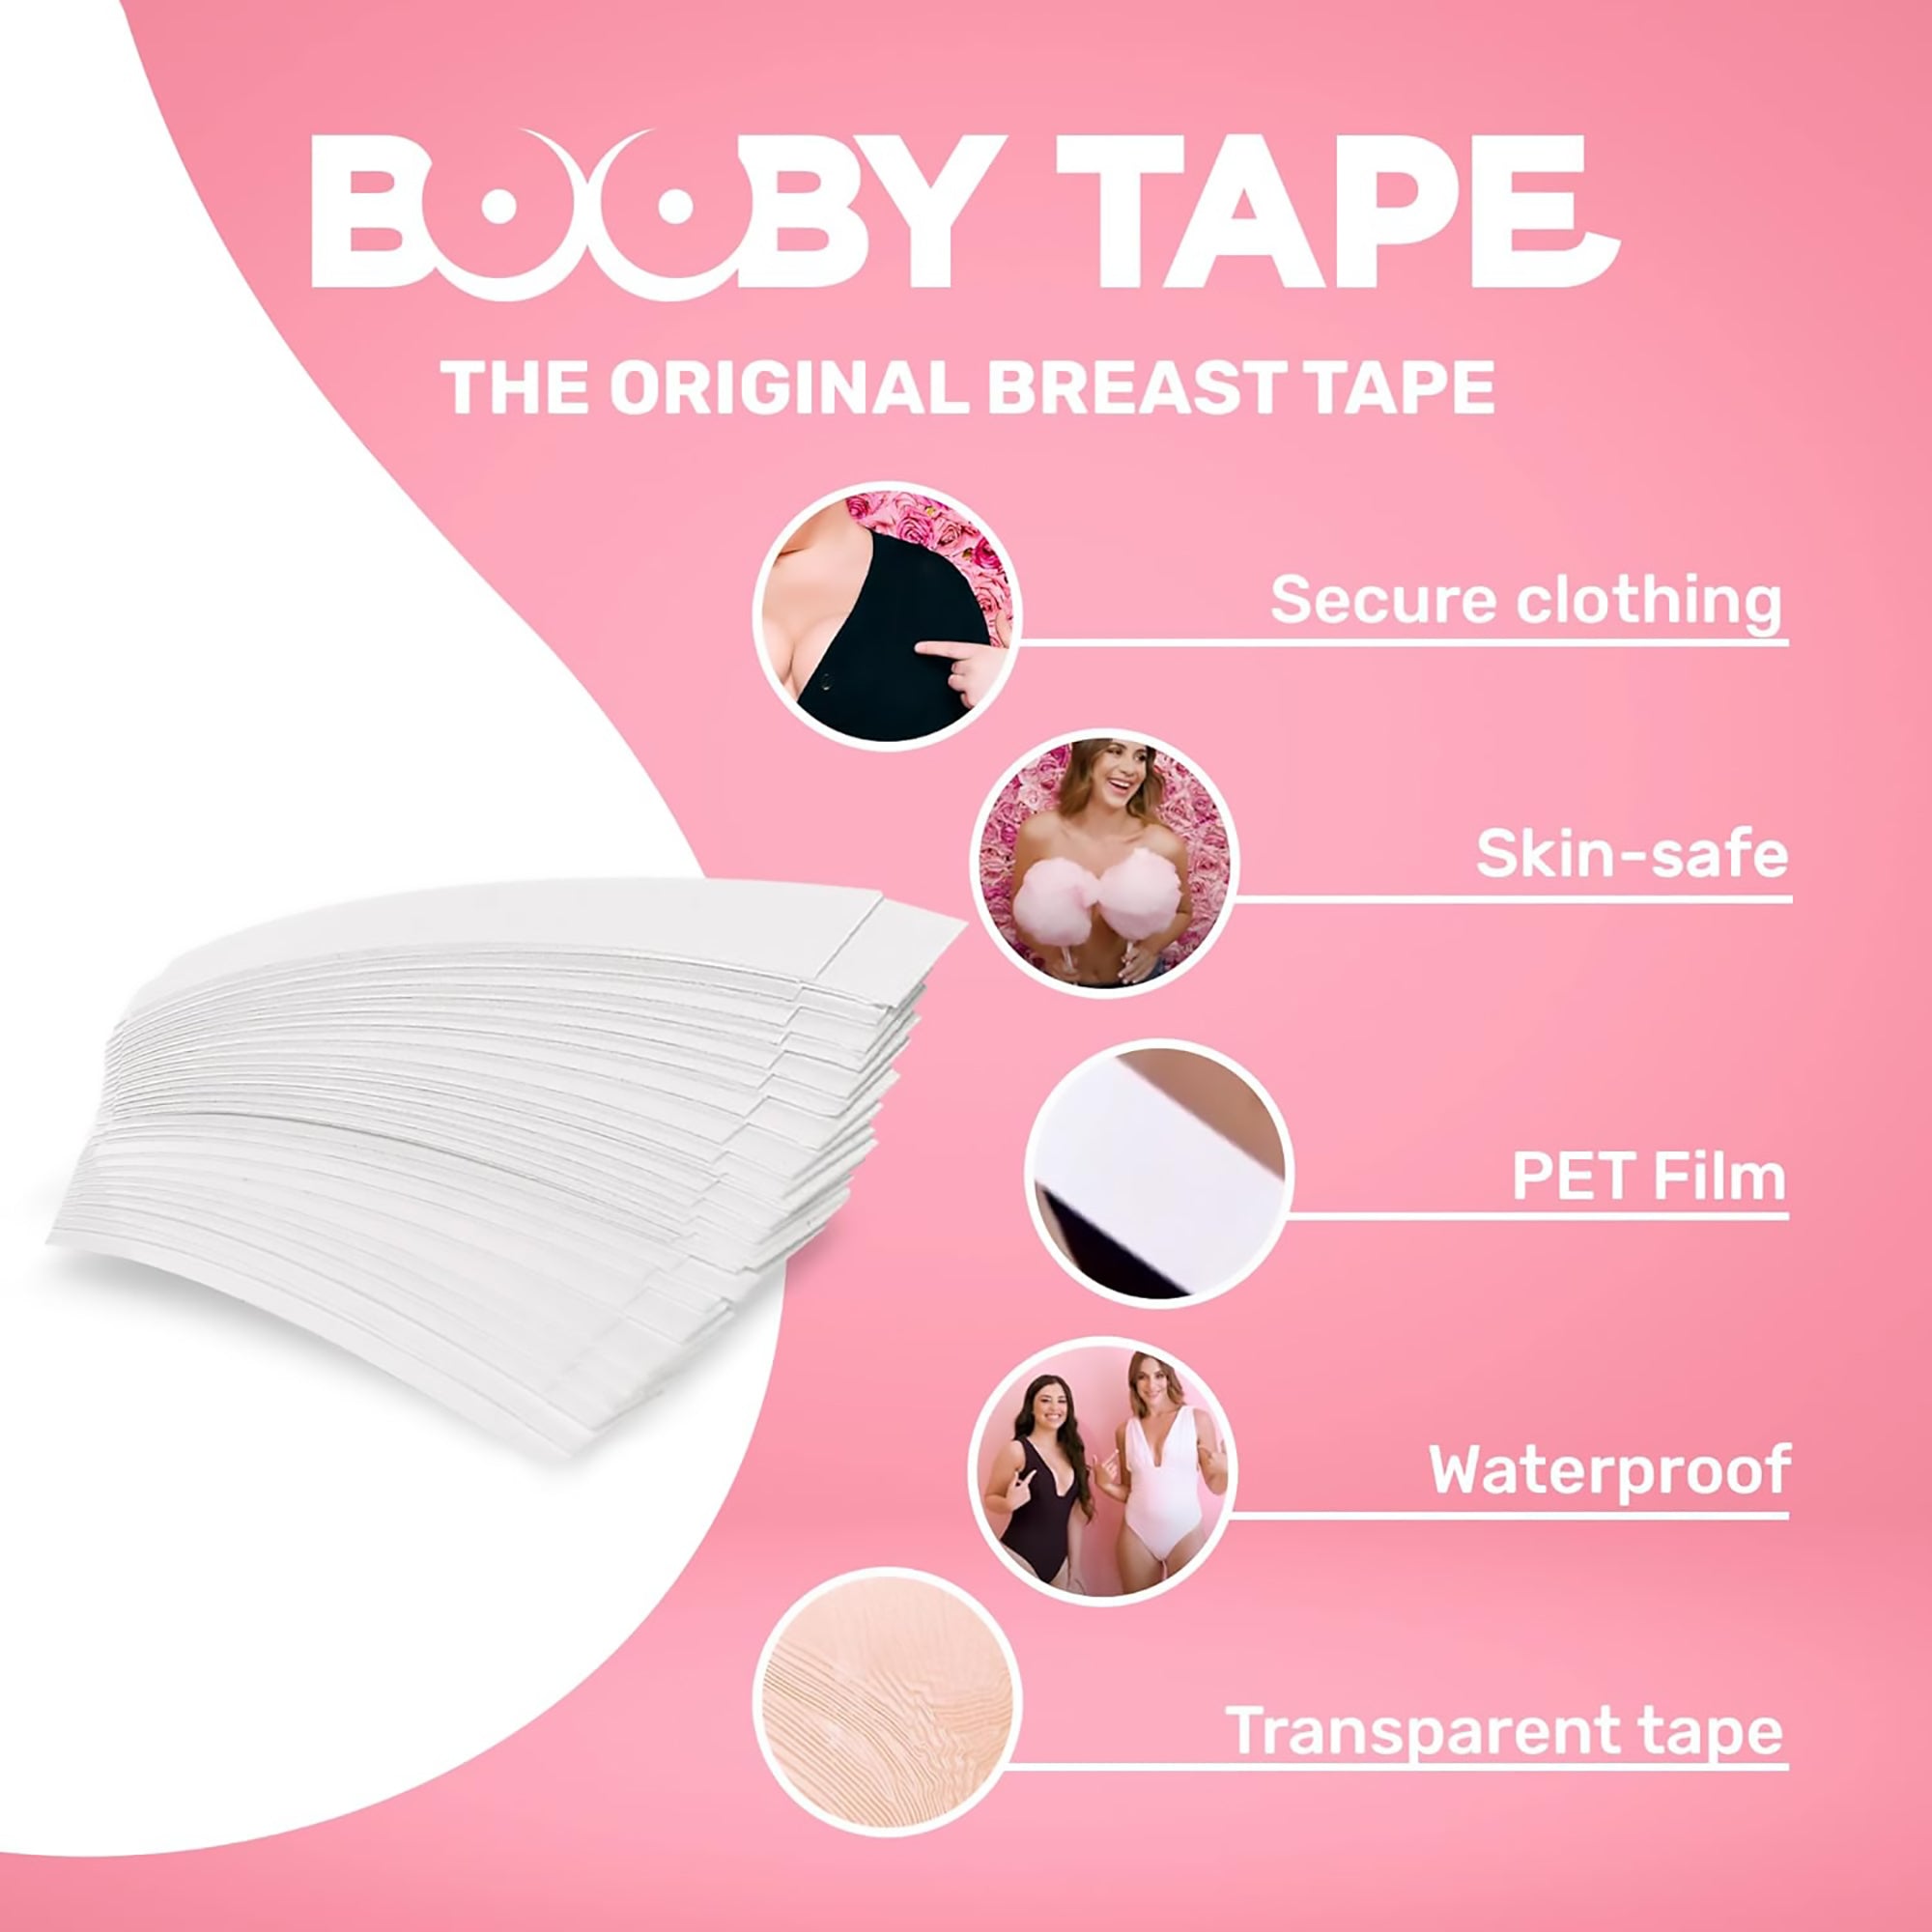 Buy Booby Tape Double Sided Tape 36 pack